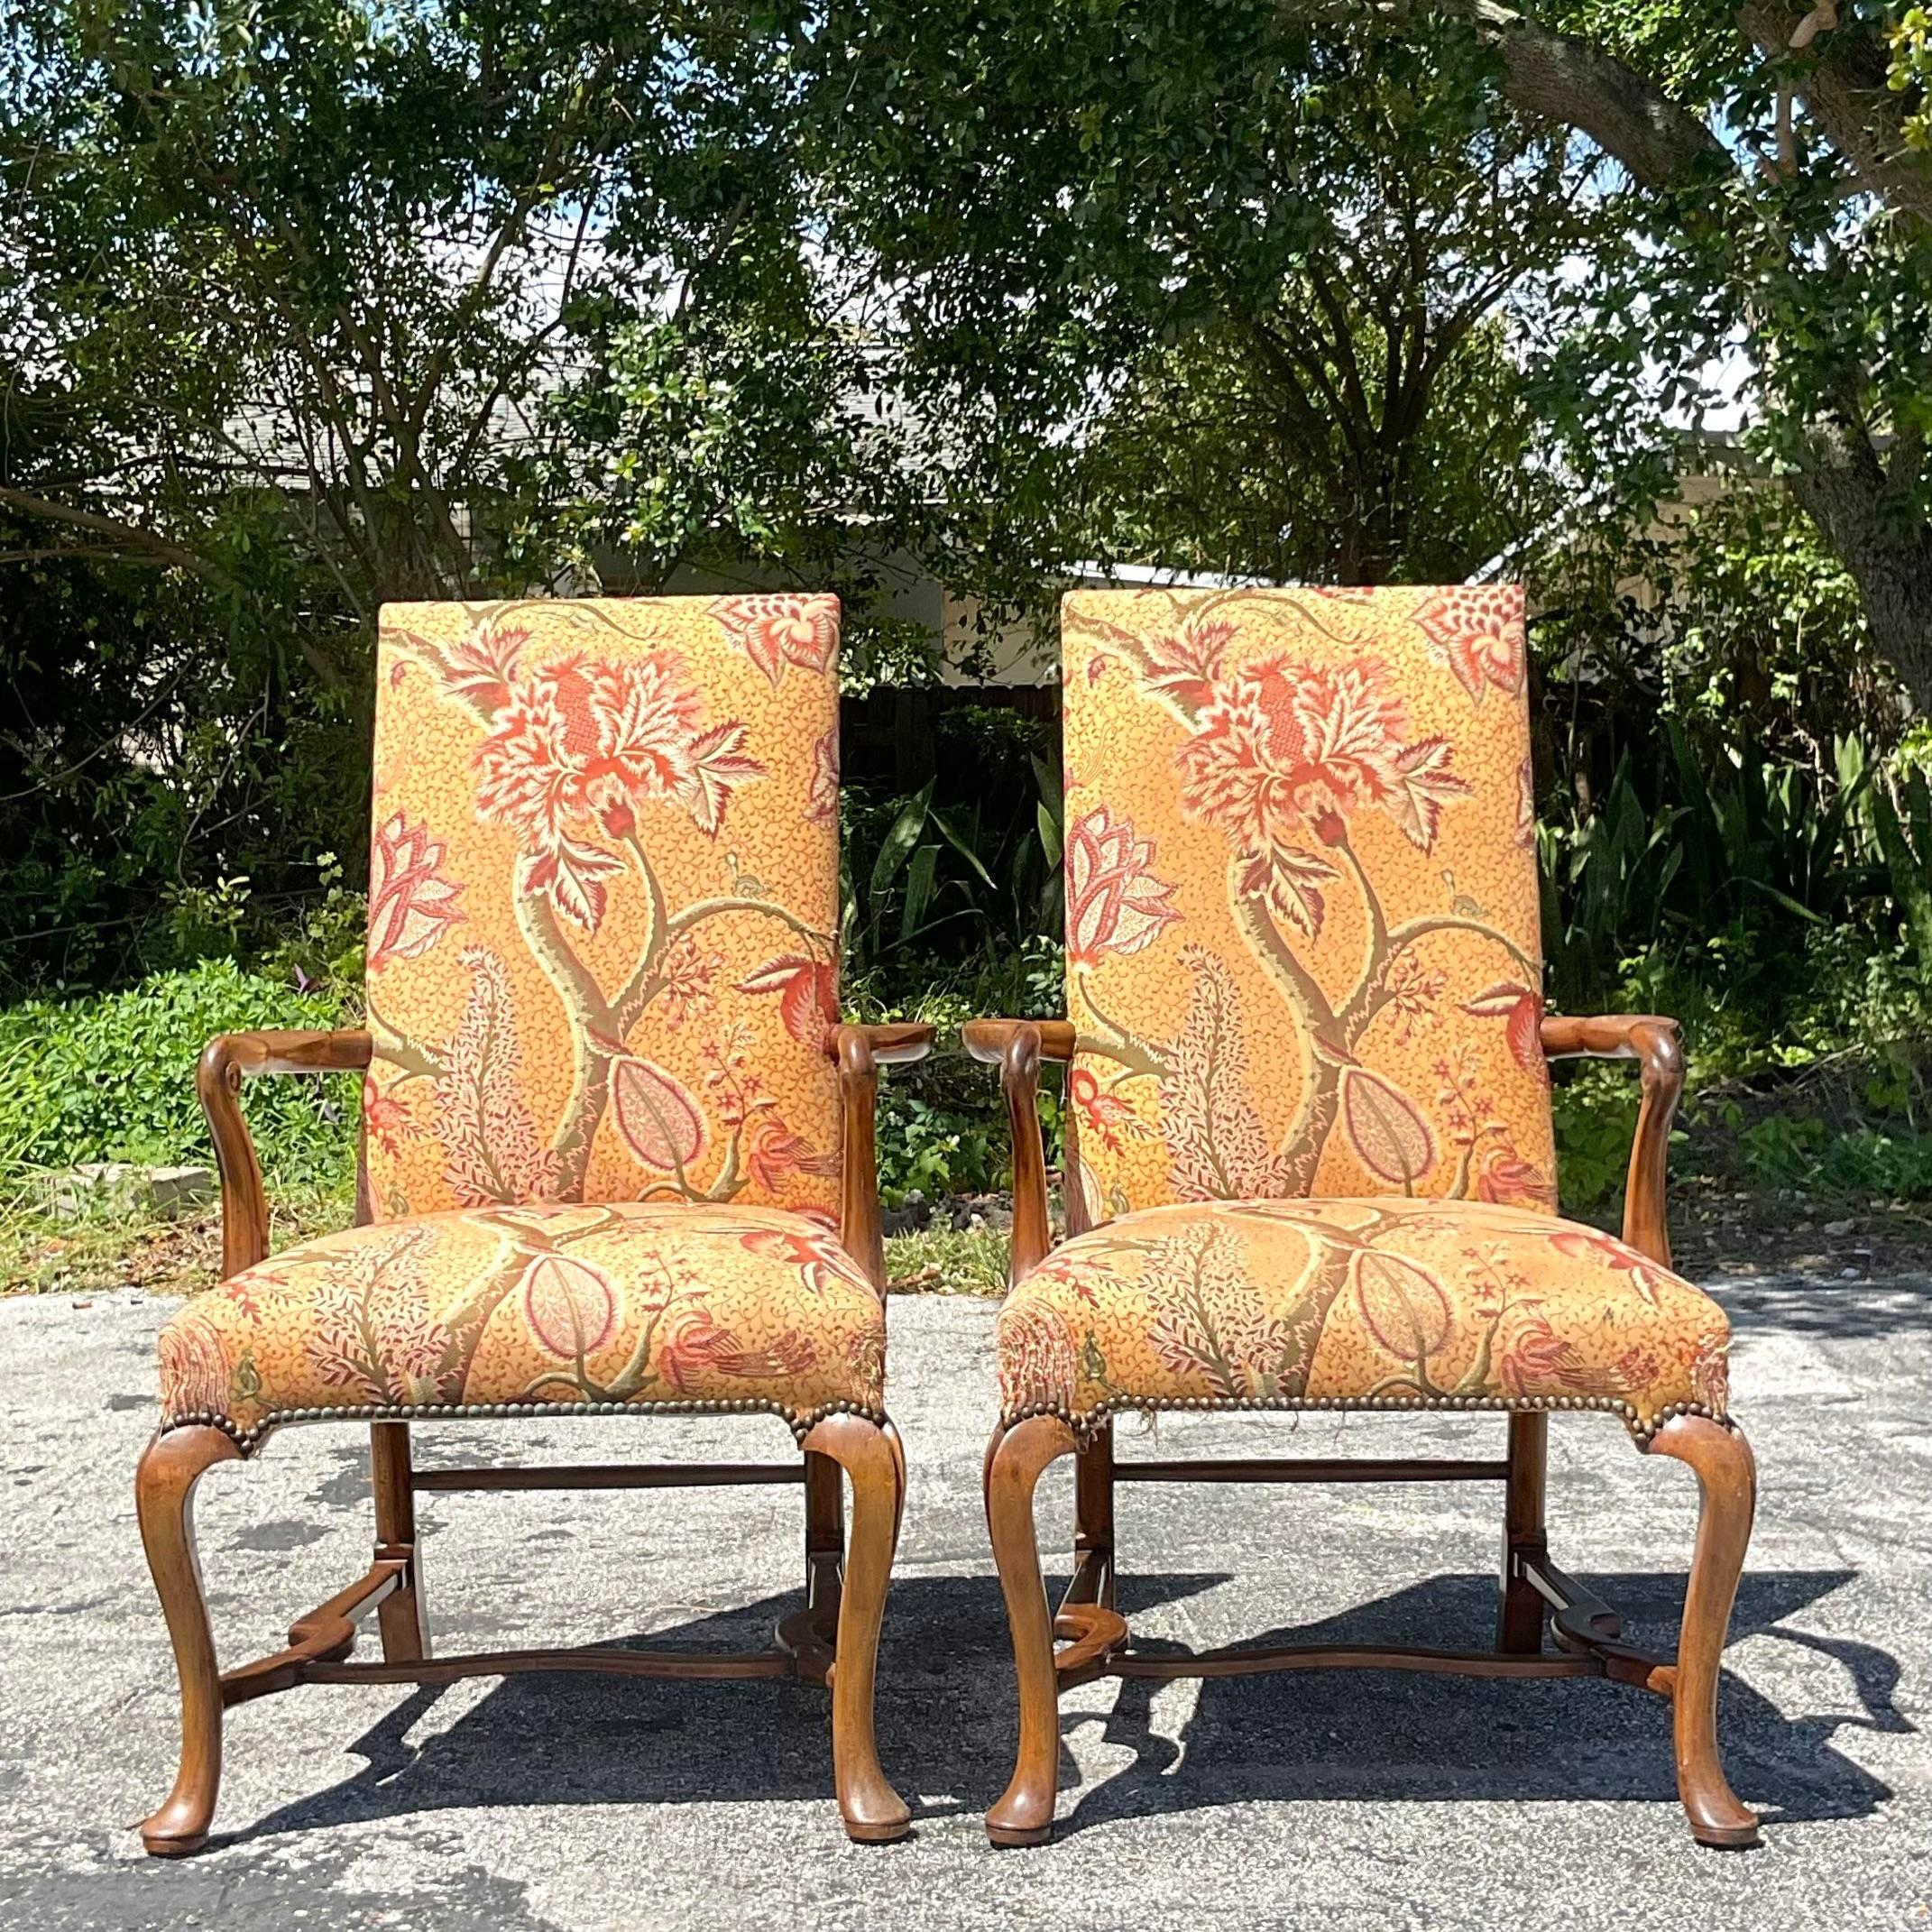 Vintage Regency Shepard’s Crook High Back Chairs - a Pair In Good Condition For Sale In west palm beach, FL